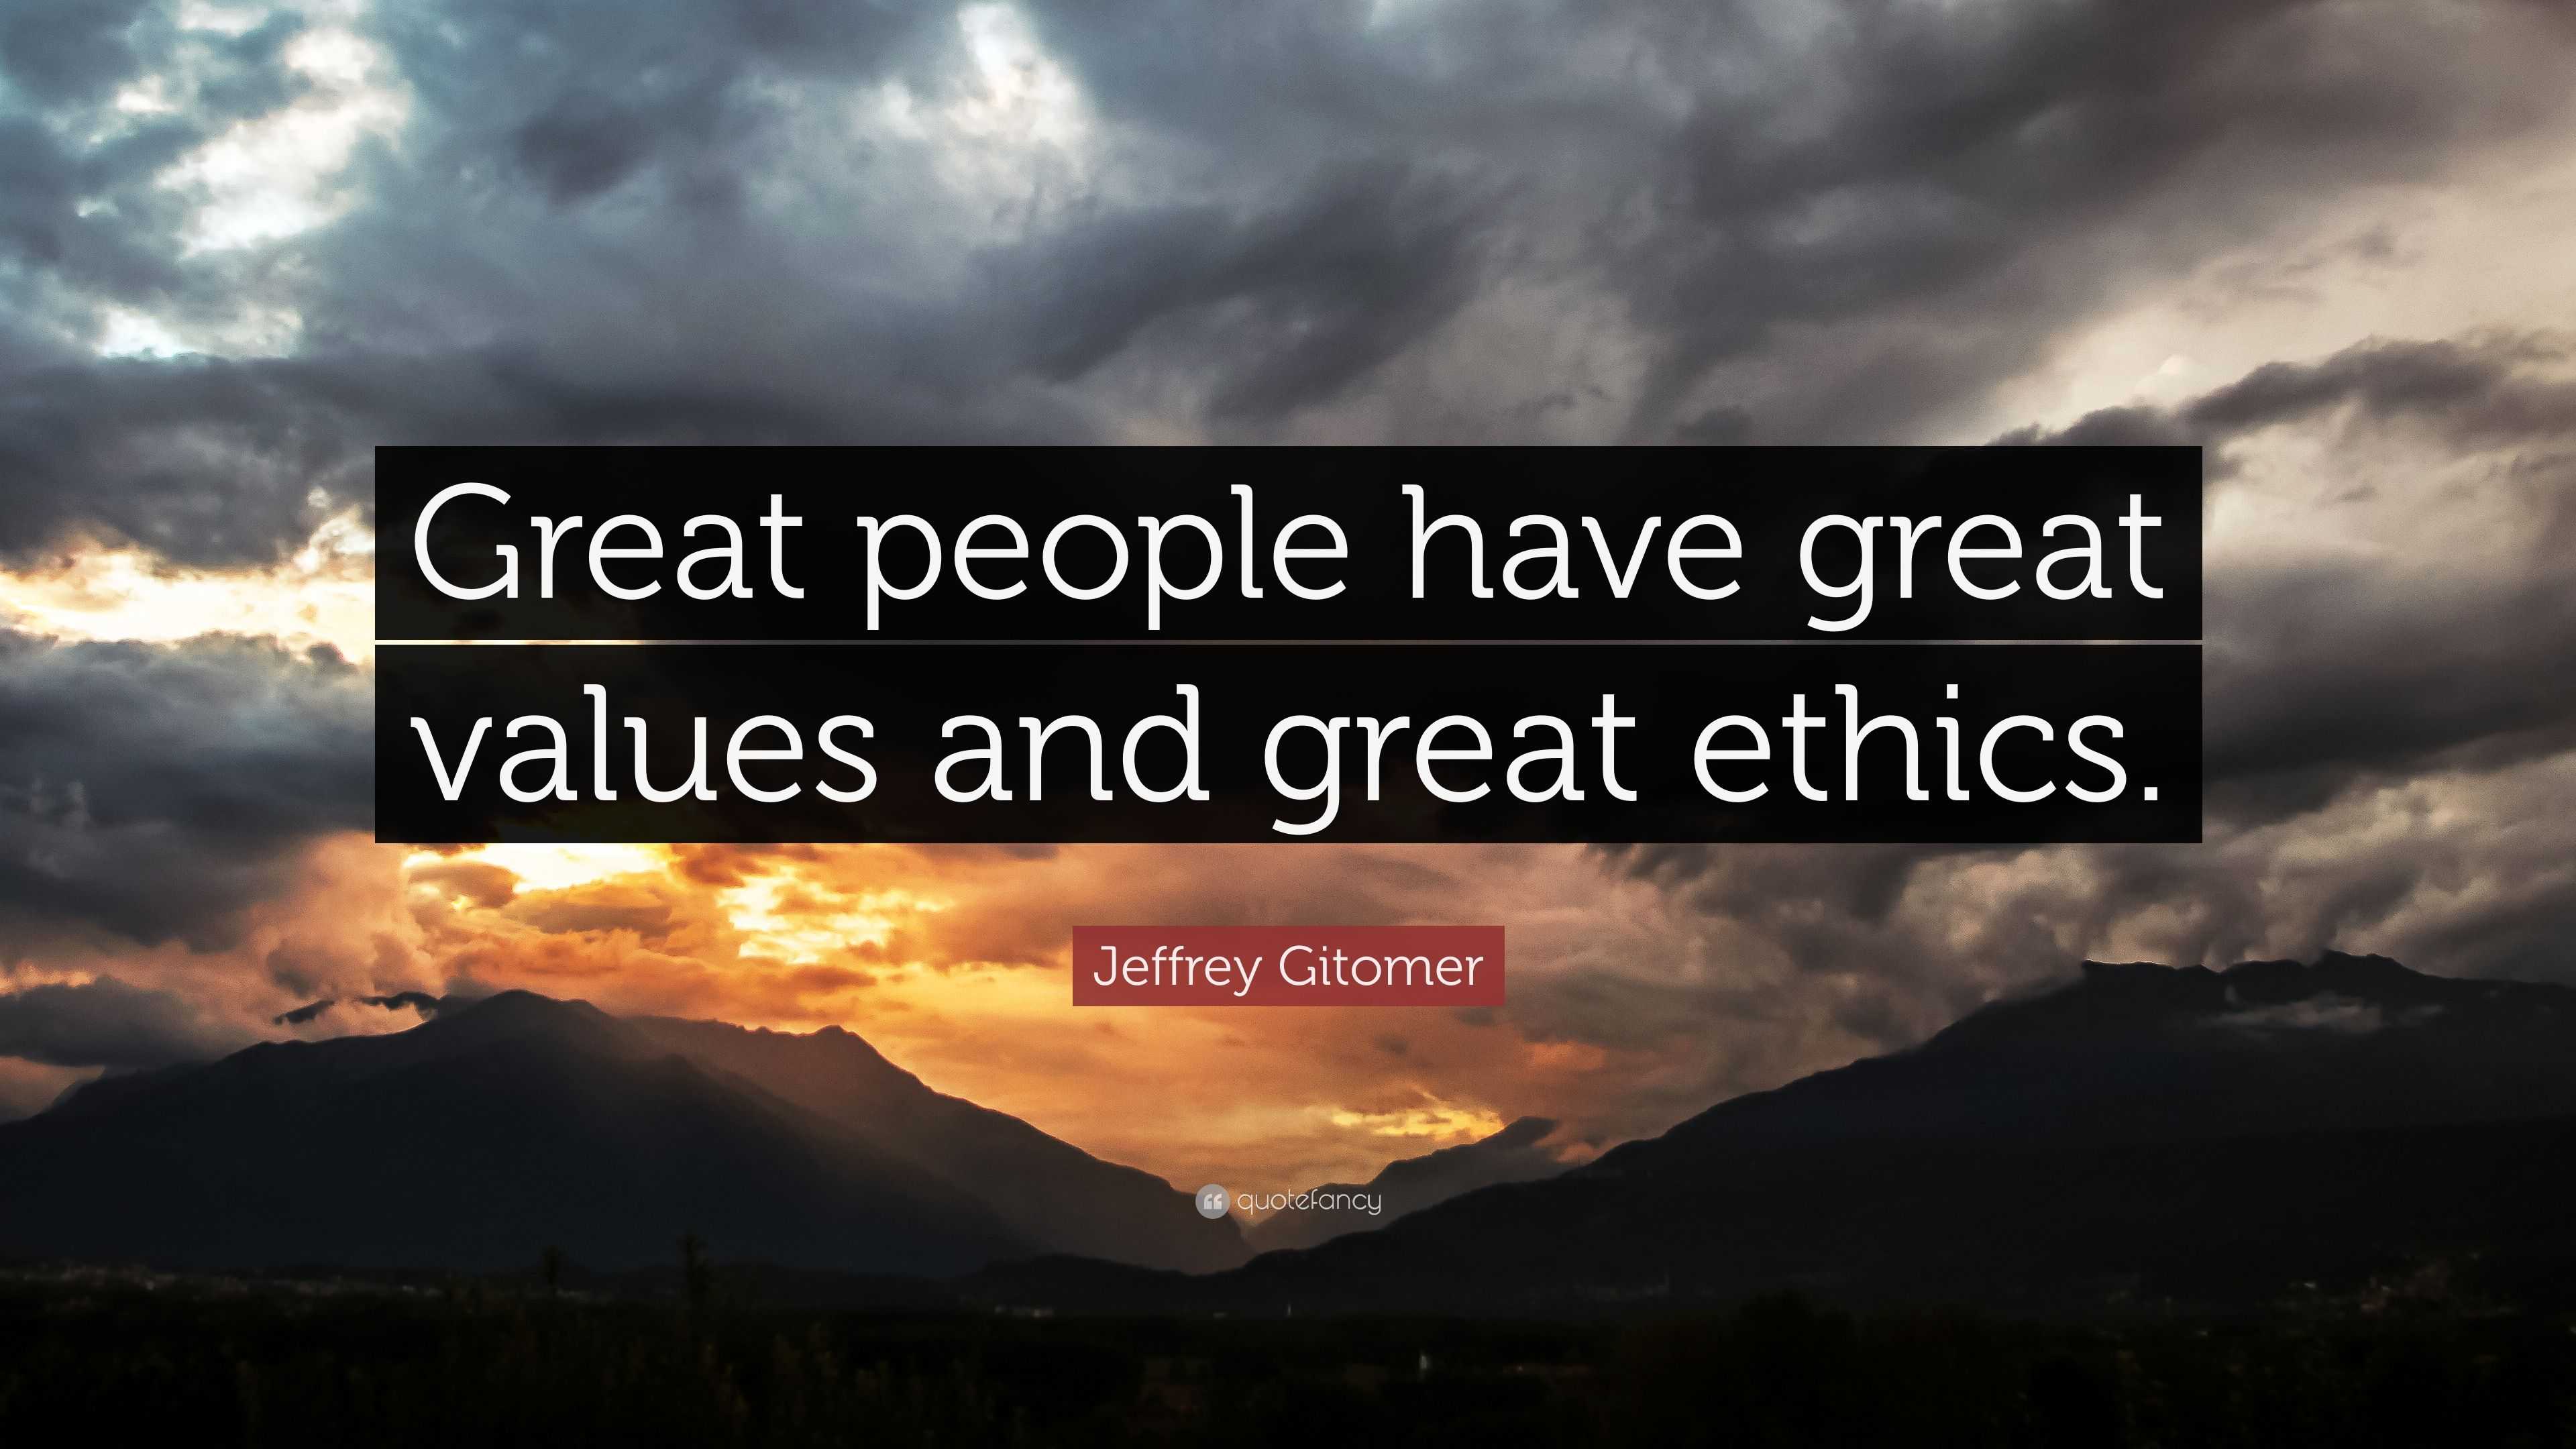 Jeffrey Gitomer Quote: “Great people have great values and great ethics.”